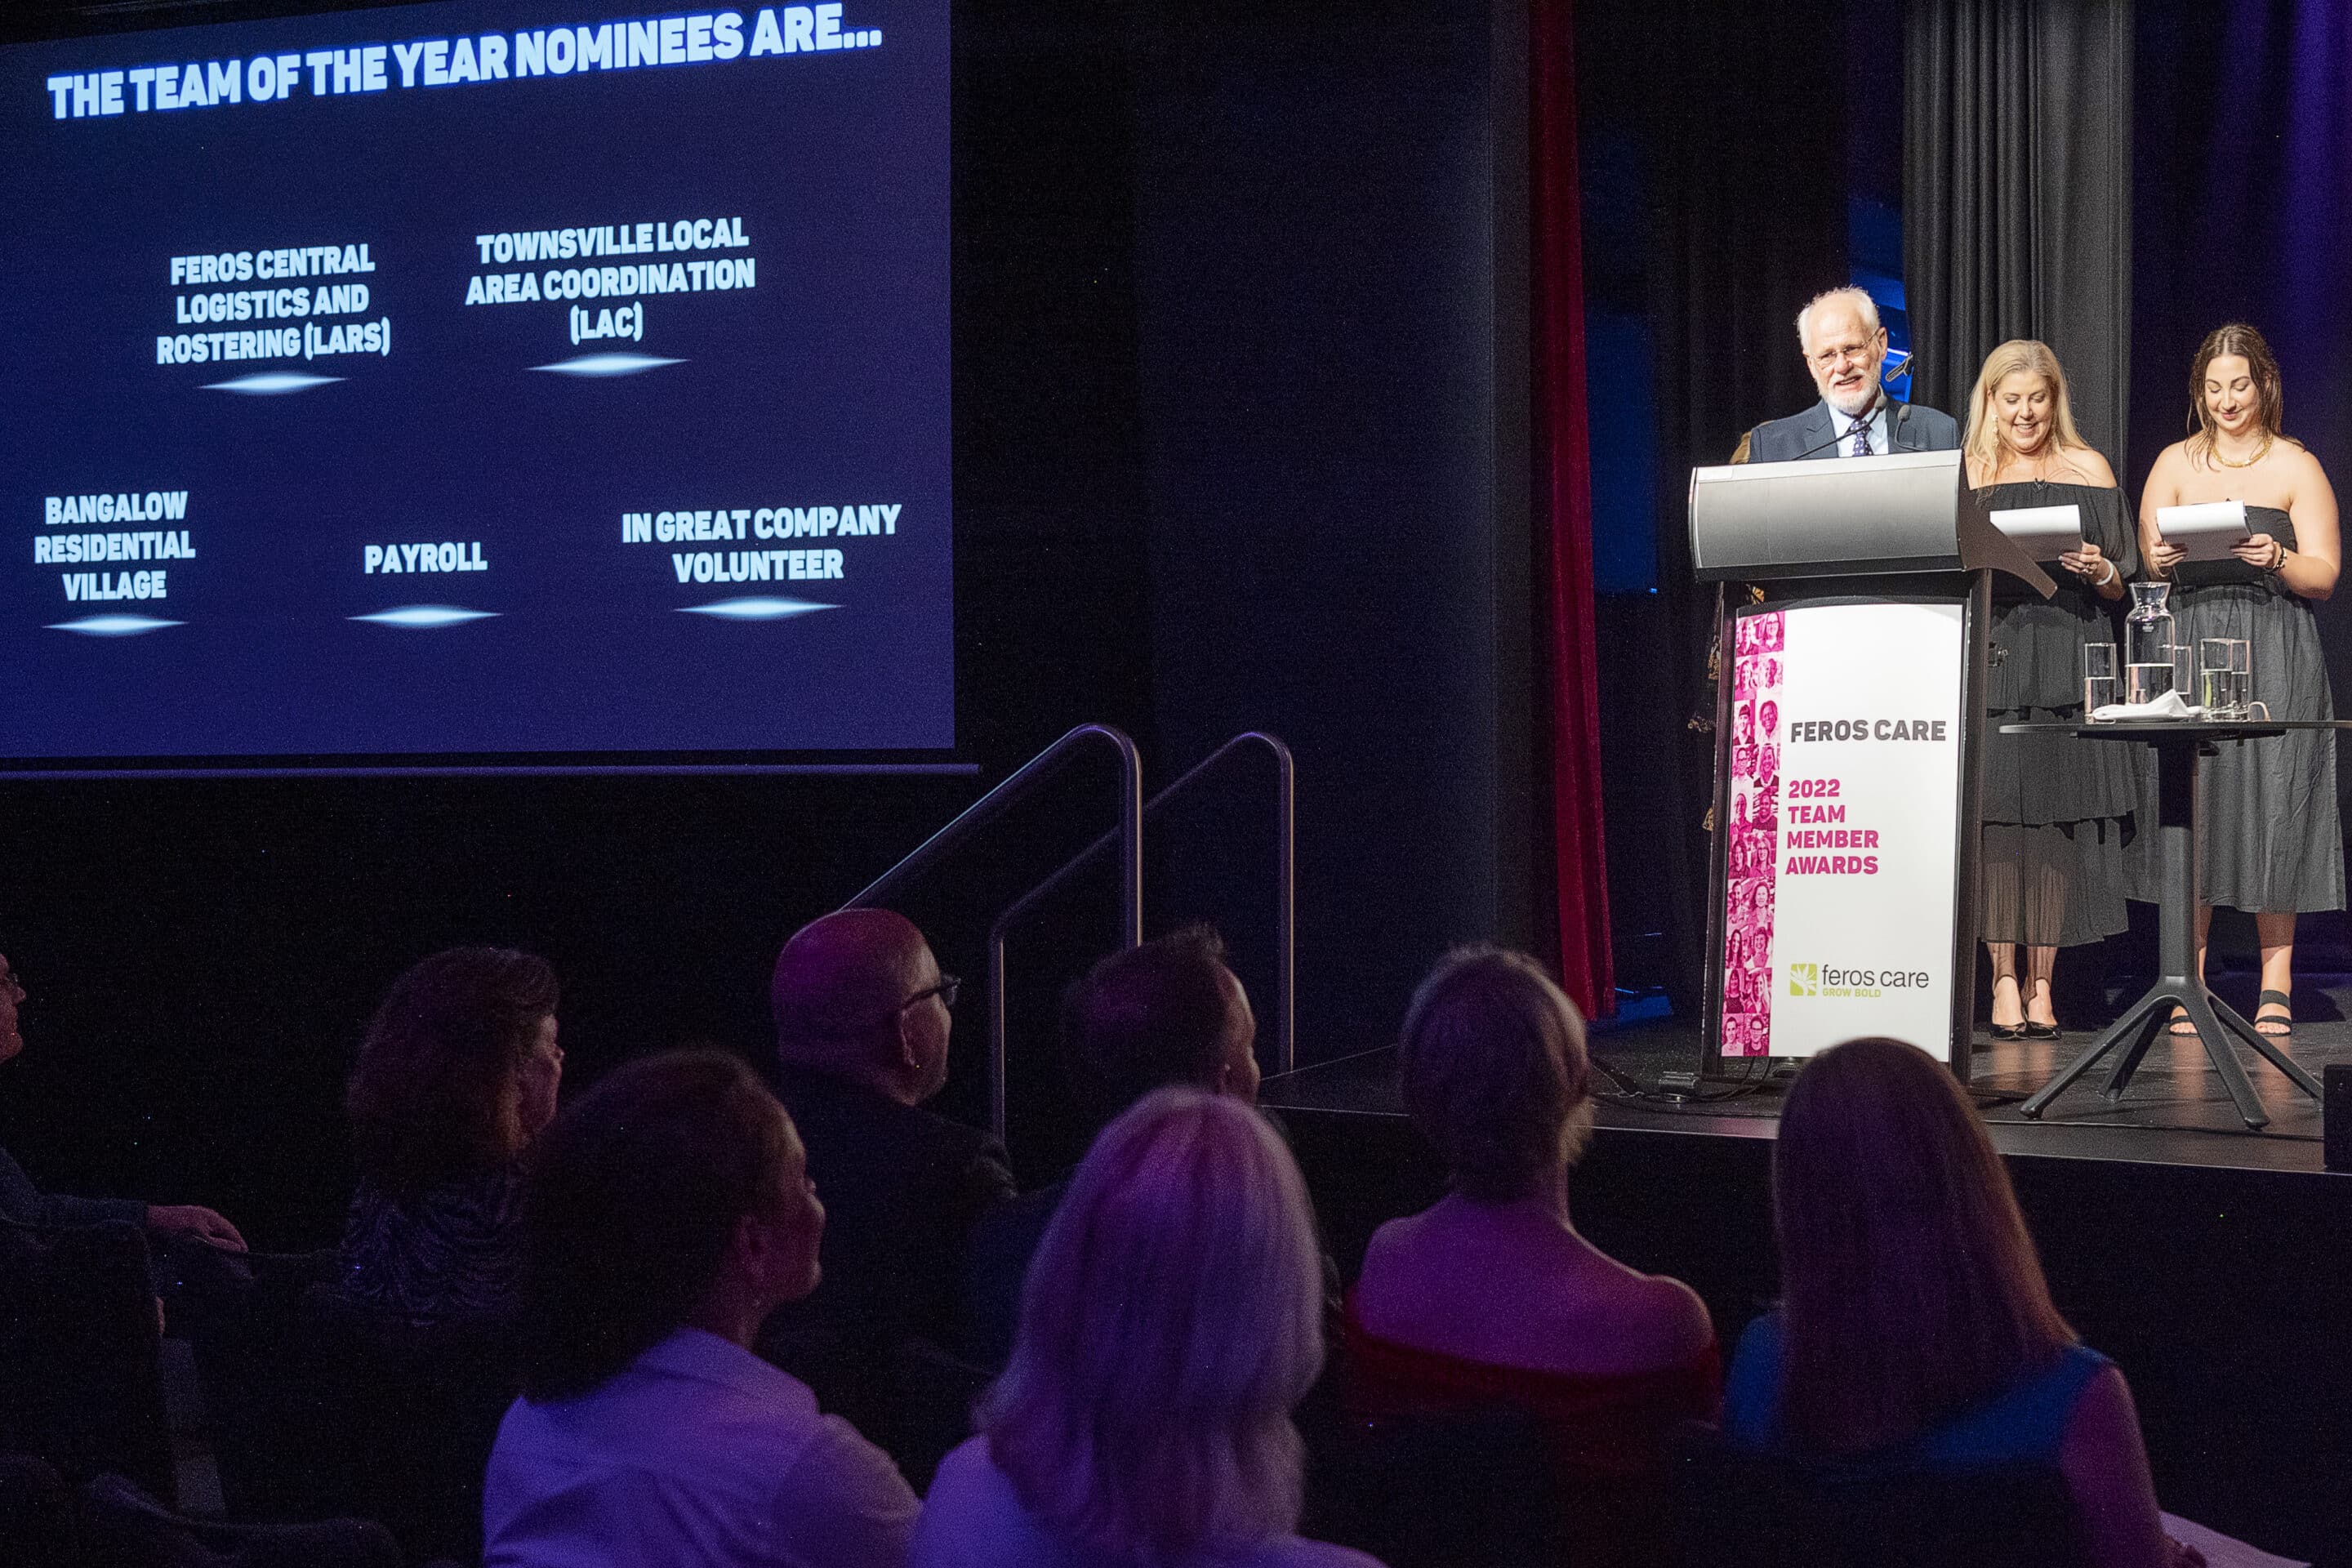 Photo of Feros Care chair announcing the Team of the Year nominees.